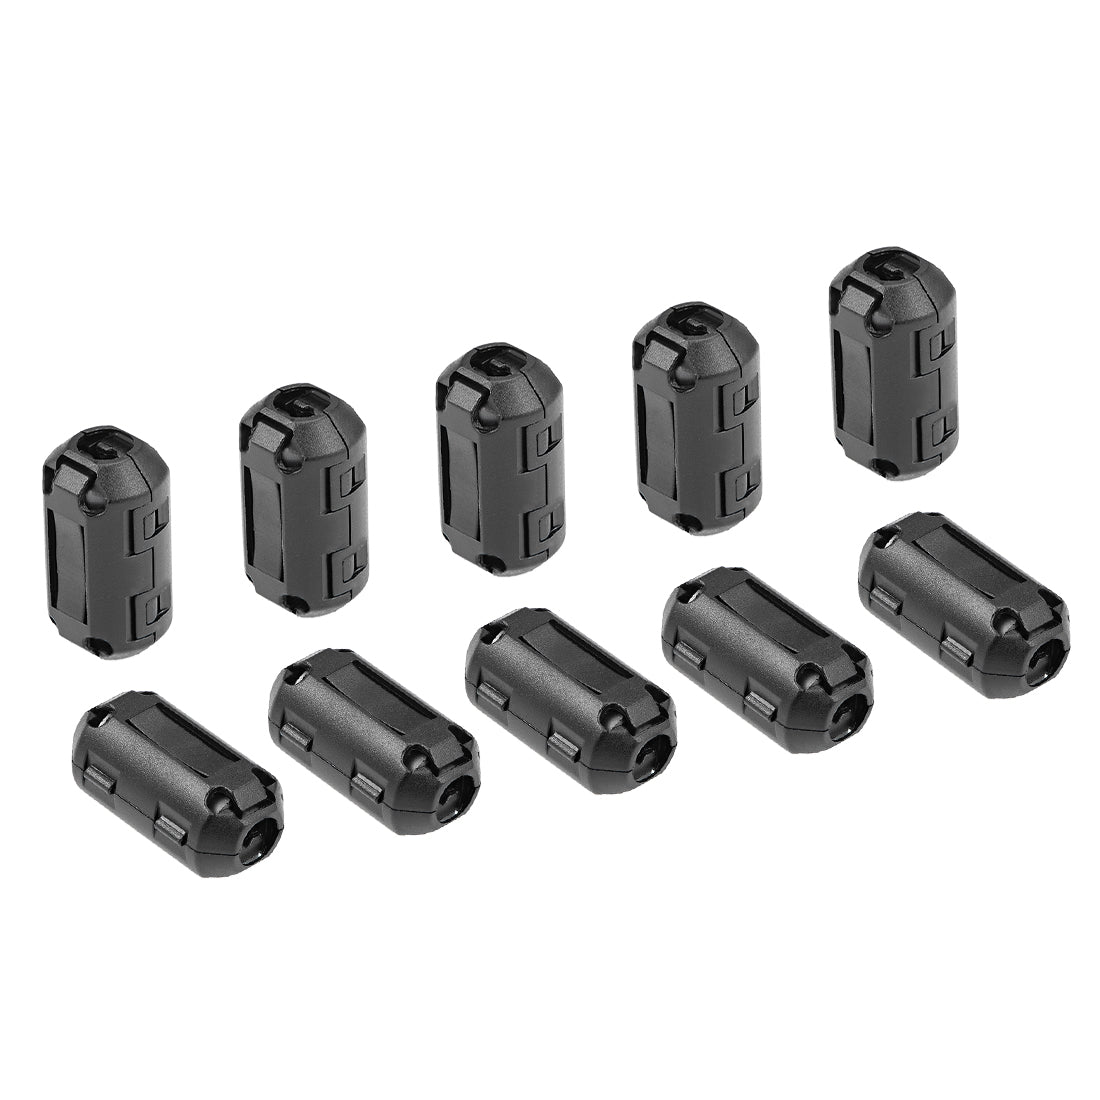 uxcell Uxcell 4.7mm Ferrite Cores Ring Clip-On RFI EMI Noise Suppression Filter Cable Clip, Black 10pcs